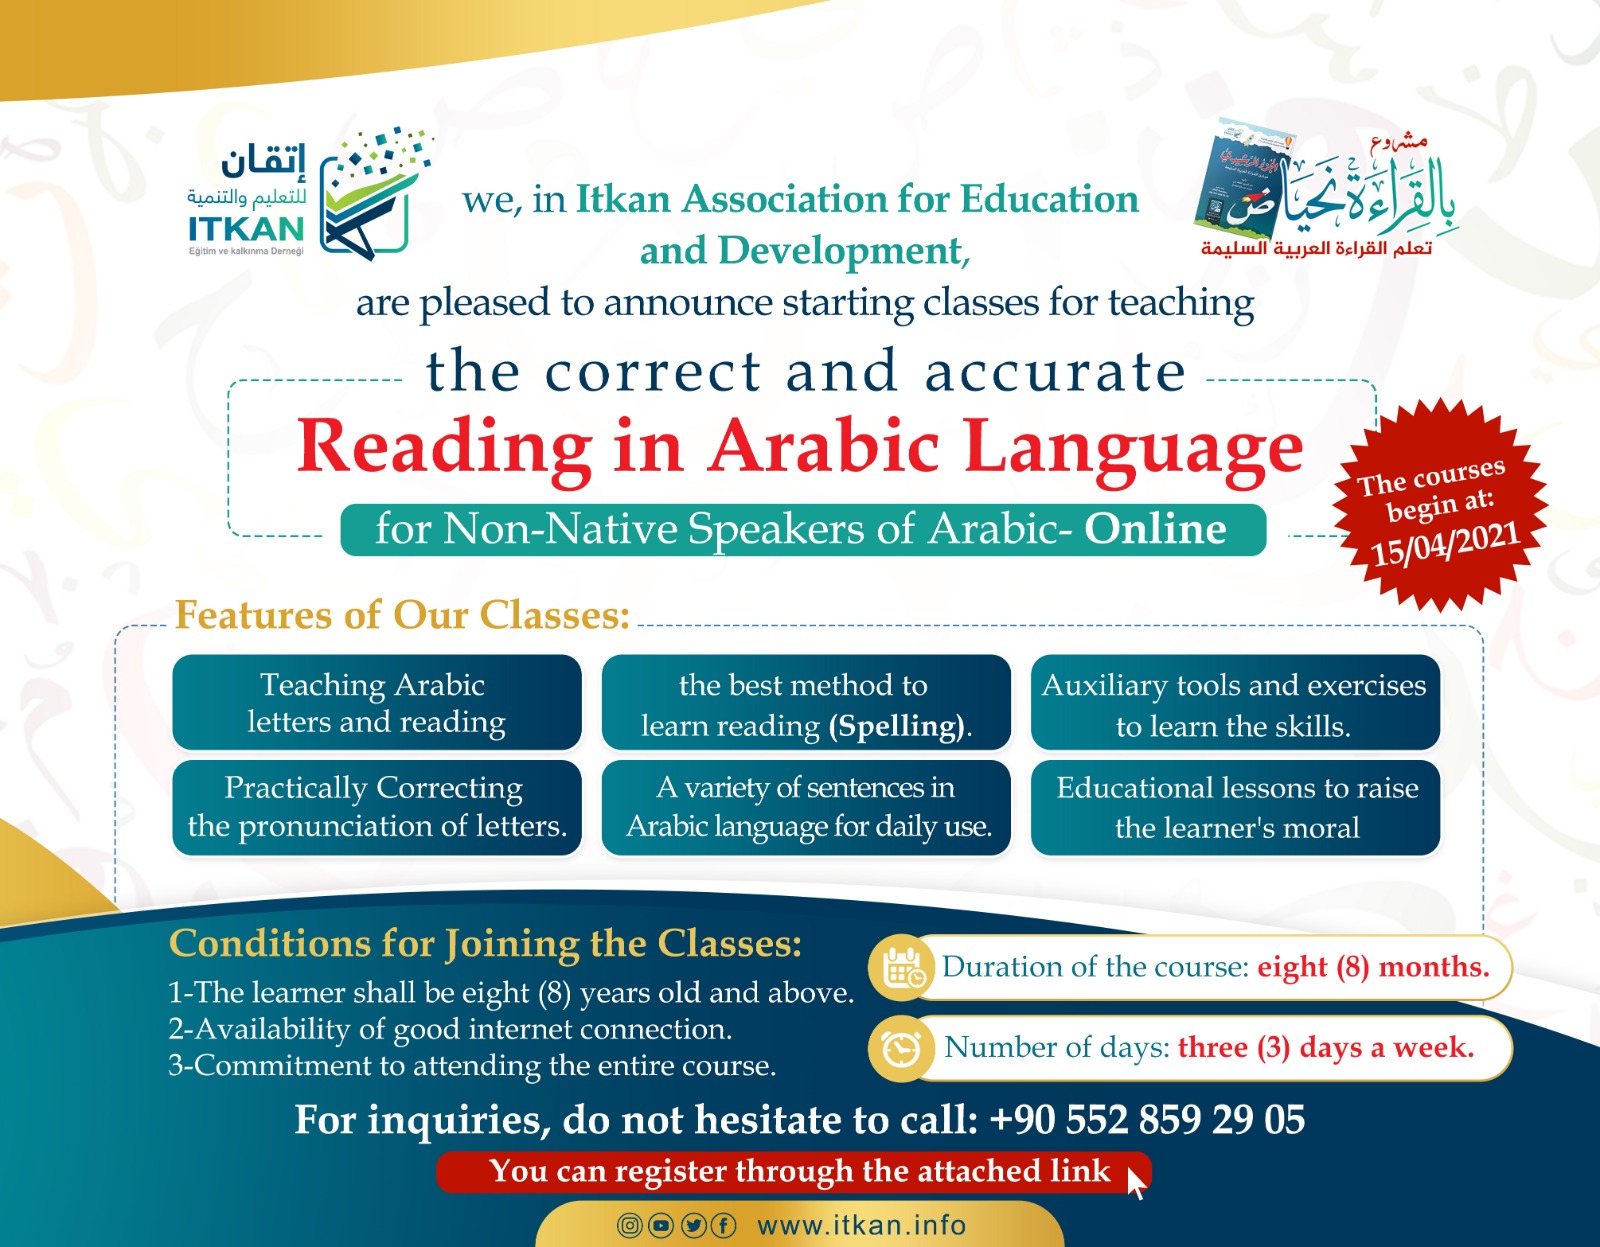 The correct and accurate Reading in Arabic Language for Non-Native Speakers of Arabic- Online